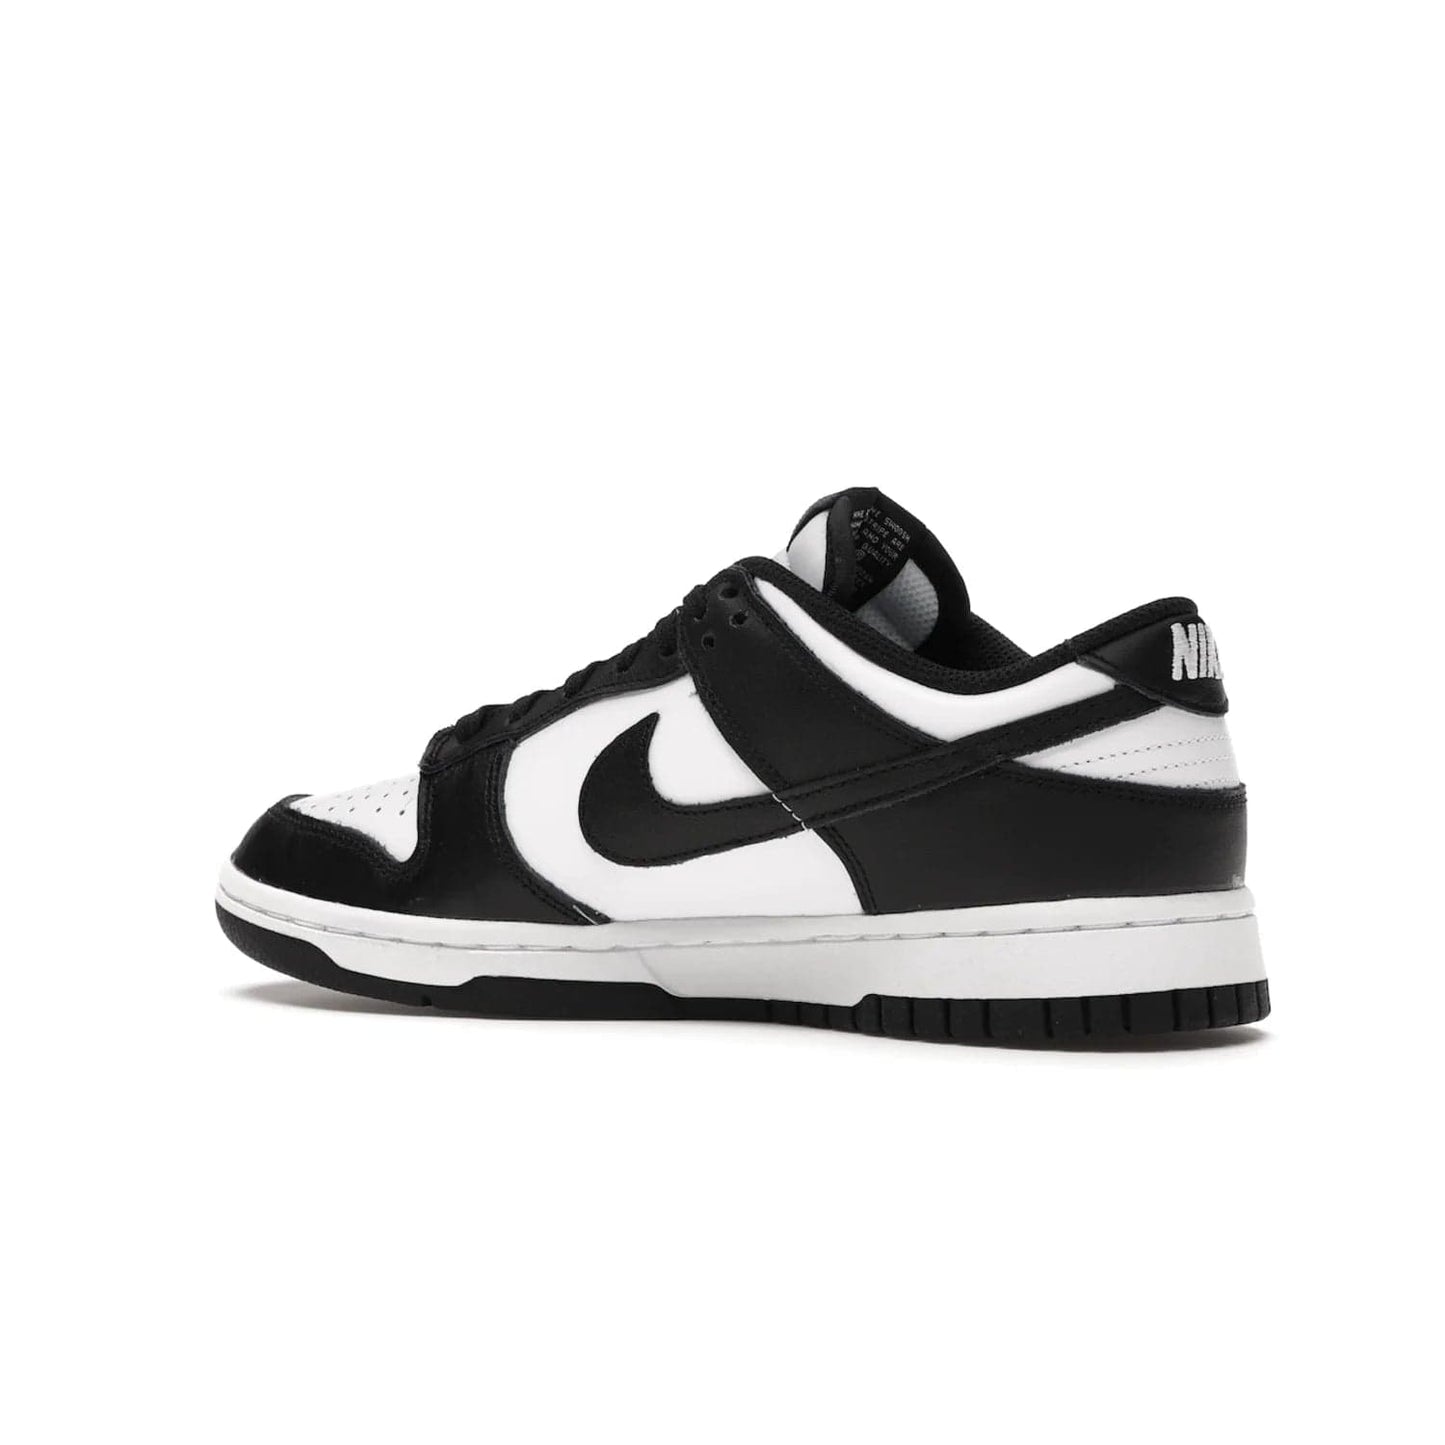 Nike Dunk Low Retro White Black Panda (2021) (Women's) - Image 22 - Only at www.BallersClubKickz.com - Say hello to the new Nike Dunk Low Retro White Black Panda (2021) (Women's)! White & black leather upper with Nike Swoosh logo. Get your pair for $100 in March 2021! Shop now!